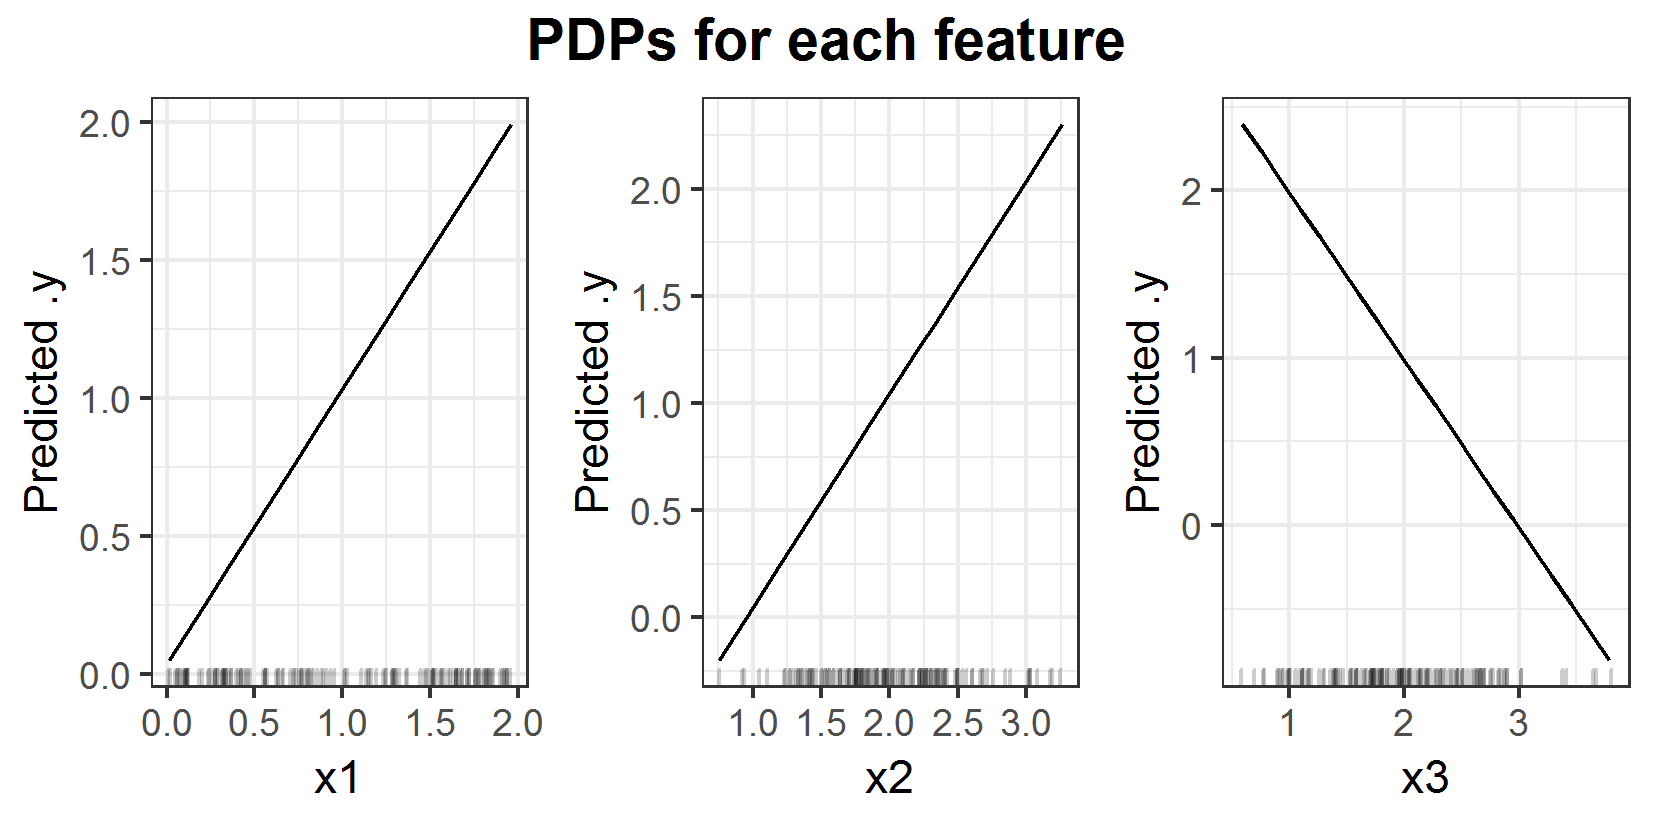 PDPs for prediction function \(f(x_1, x_2, x_3) = x_1 + x_2 - x_3\).